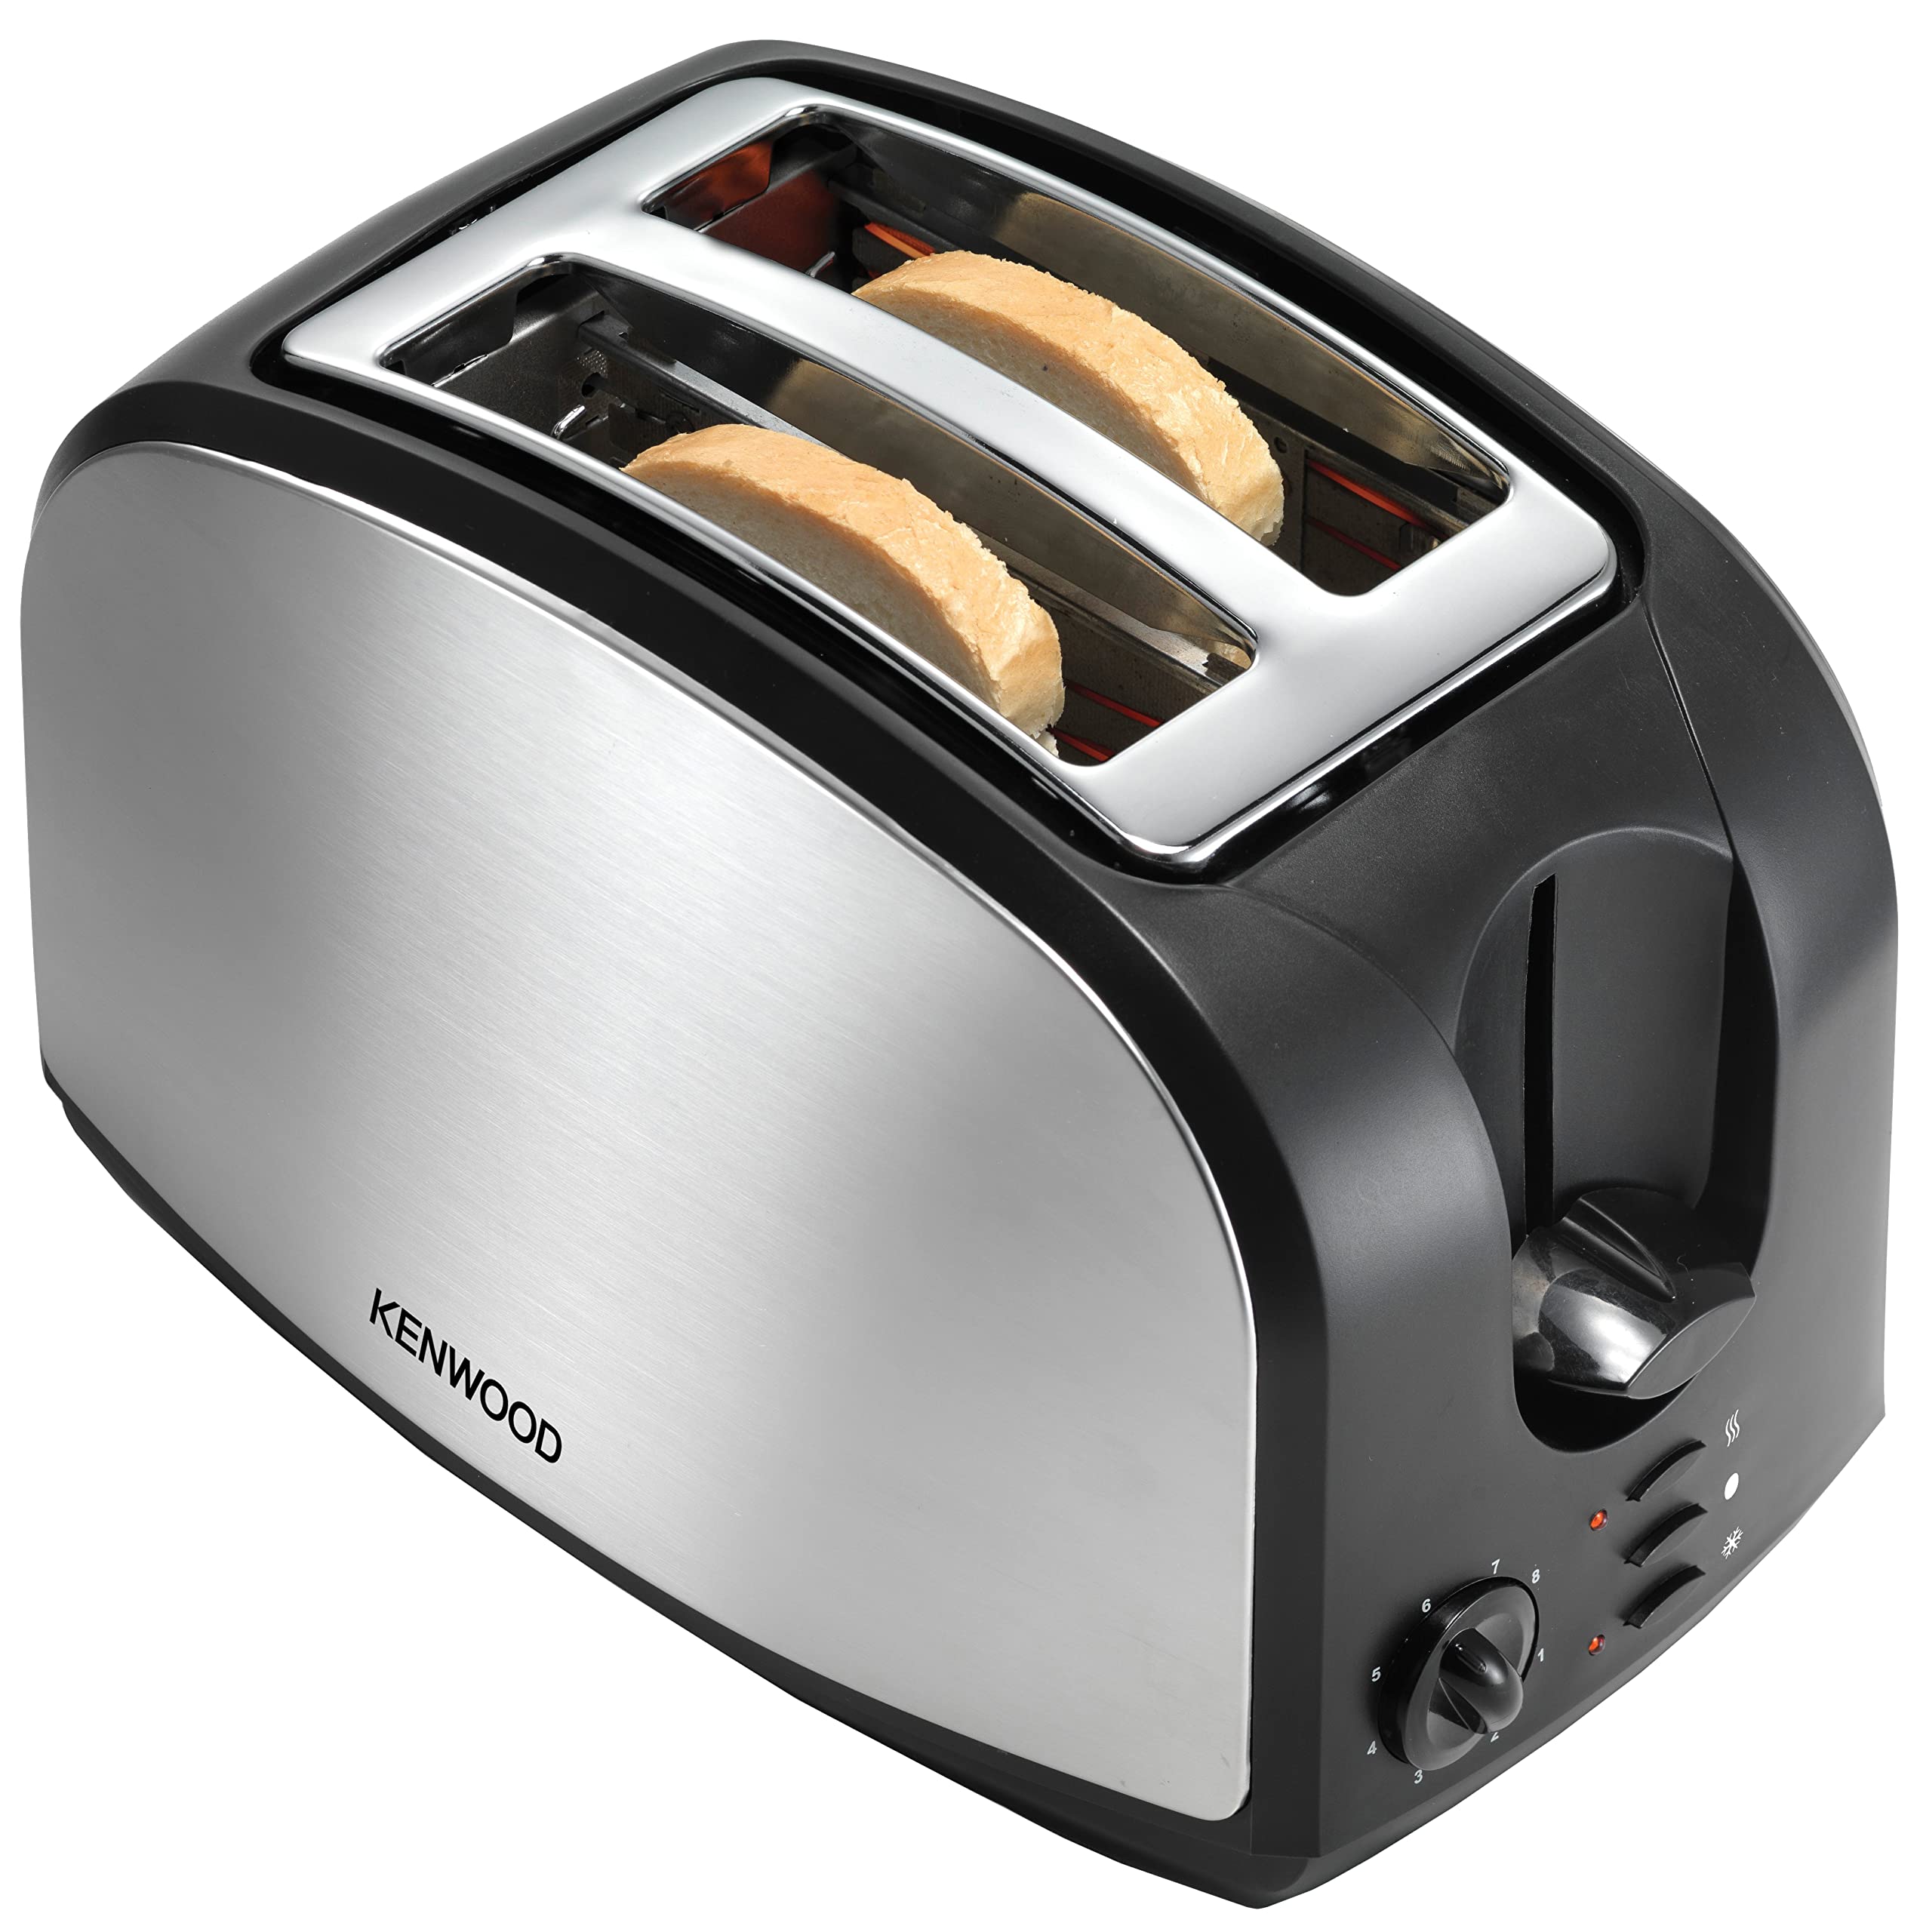 Kenwood Toaster, 900W, 2 Slices, Reheat Function, Removable Limescale Filter, Metal Wrap, Adjustable Browning Control, Defrost, Cancel Function, TCM01.A0BK, Silver